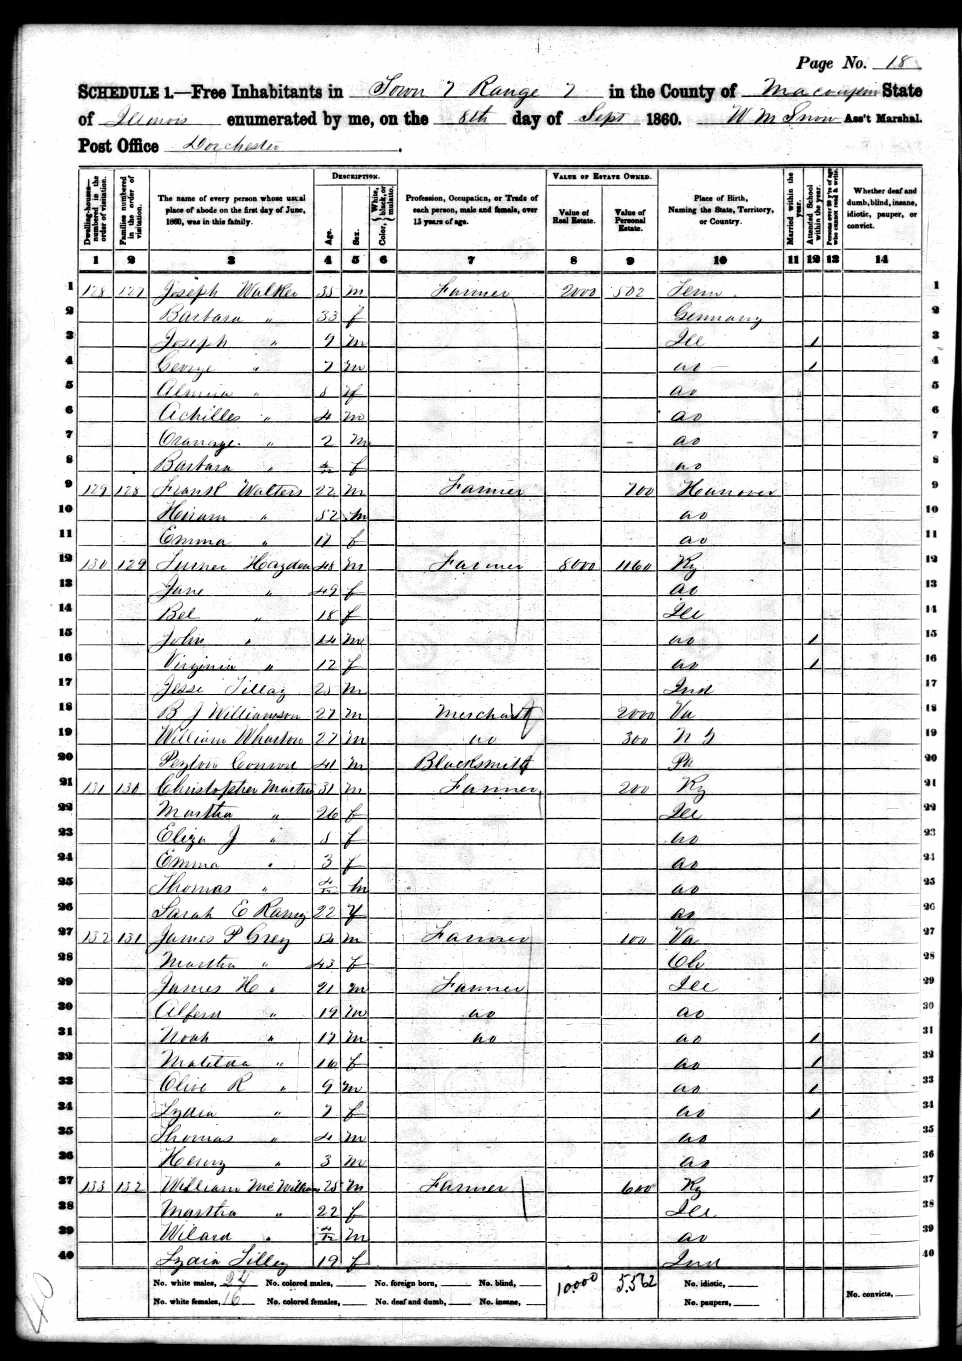 Joseph Walker (likely son of Jacob and Agnes), 1860 Macoupin County, Illinois, census.